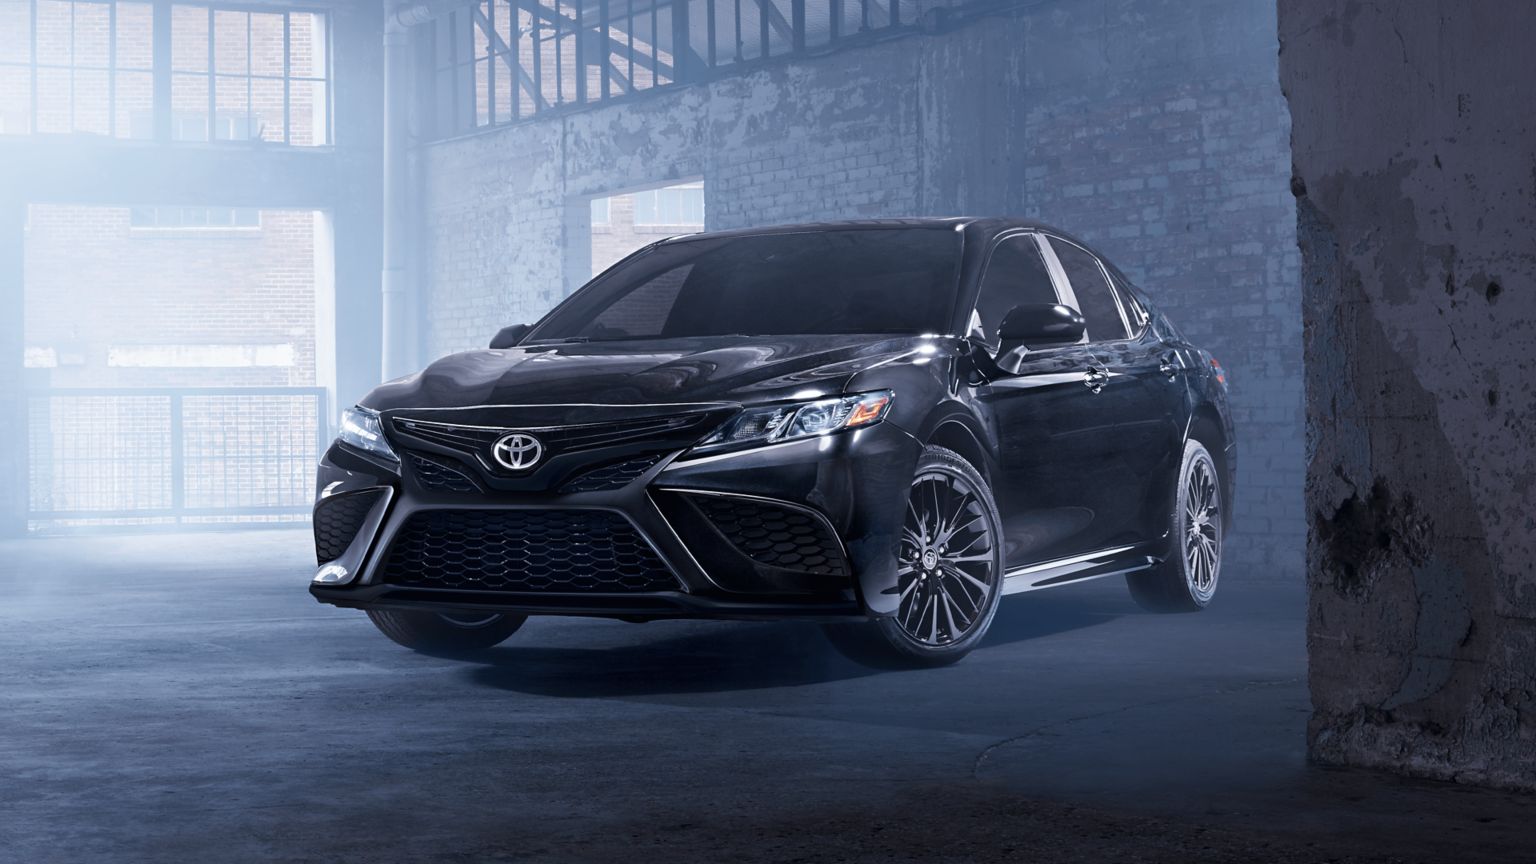 Trim Levels of the 2020 Toyota Camry